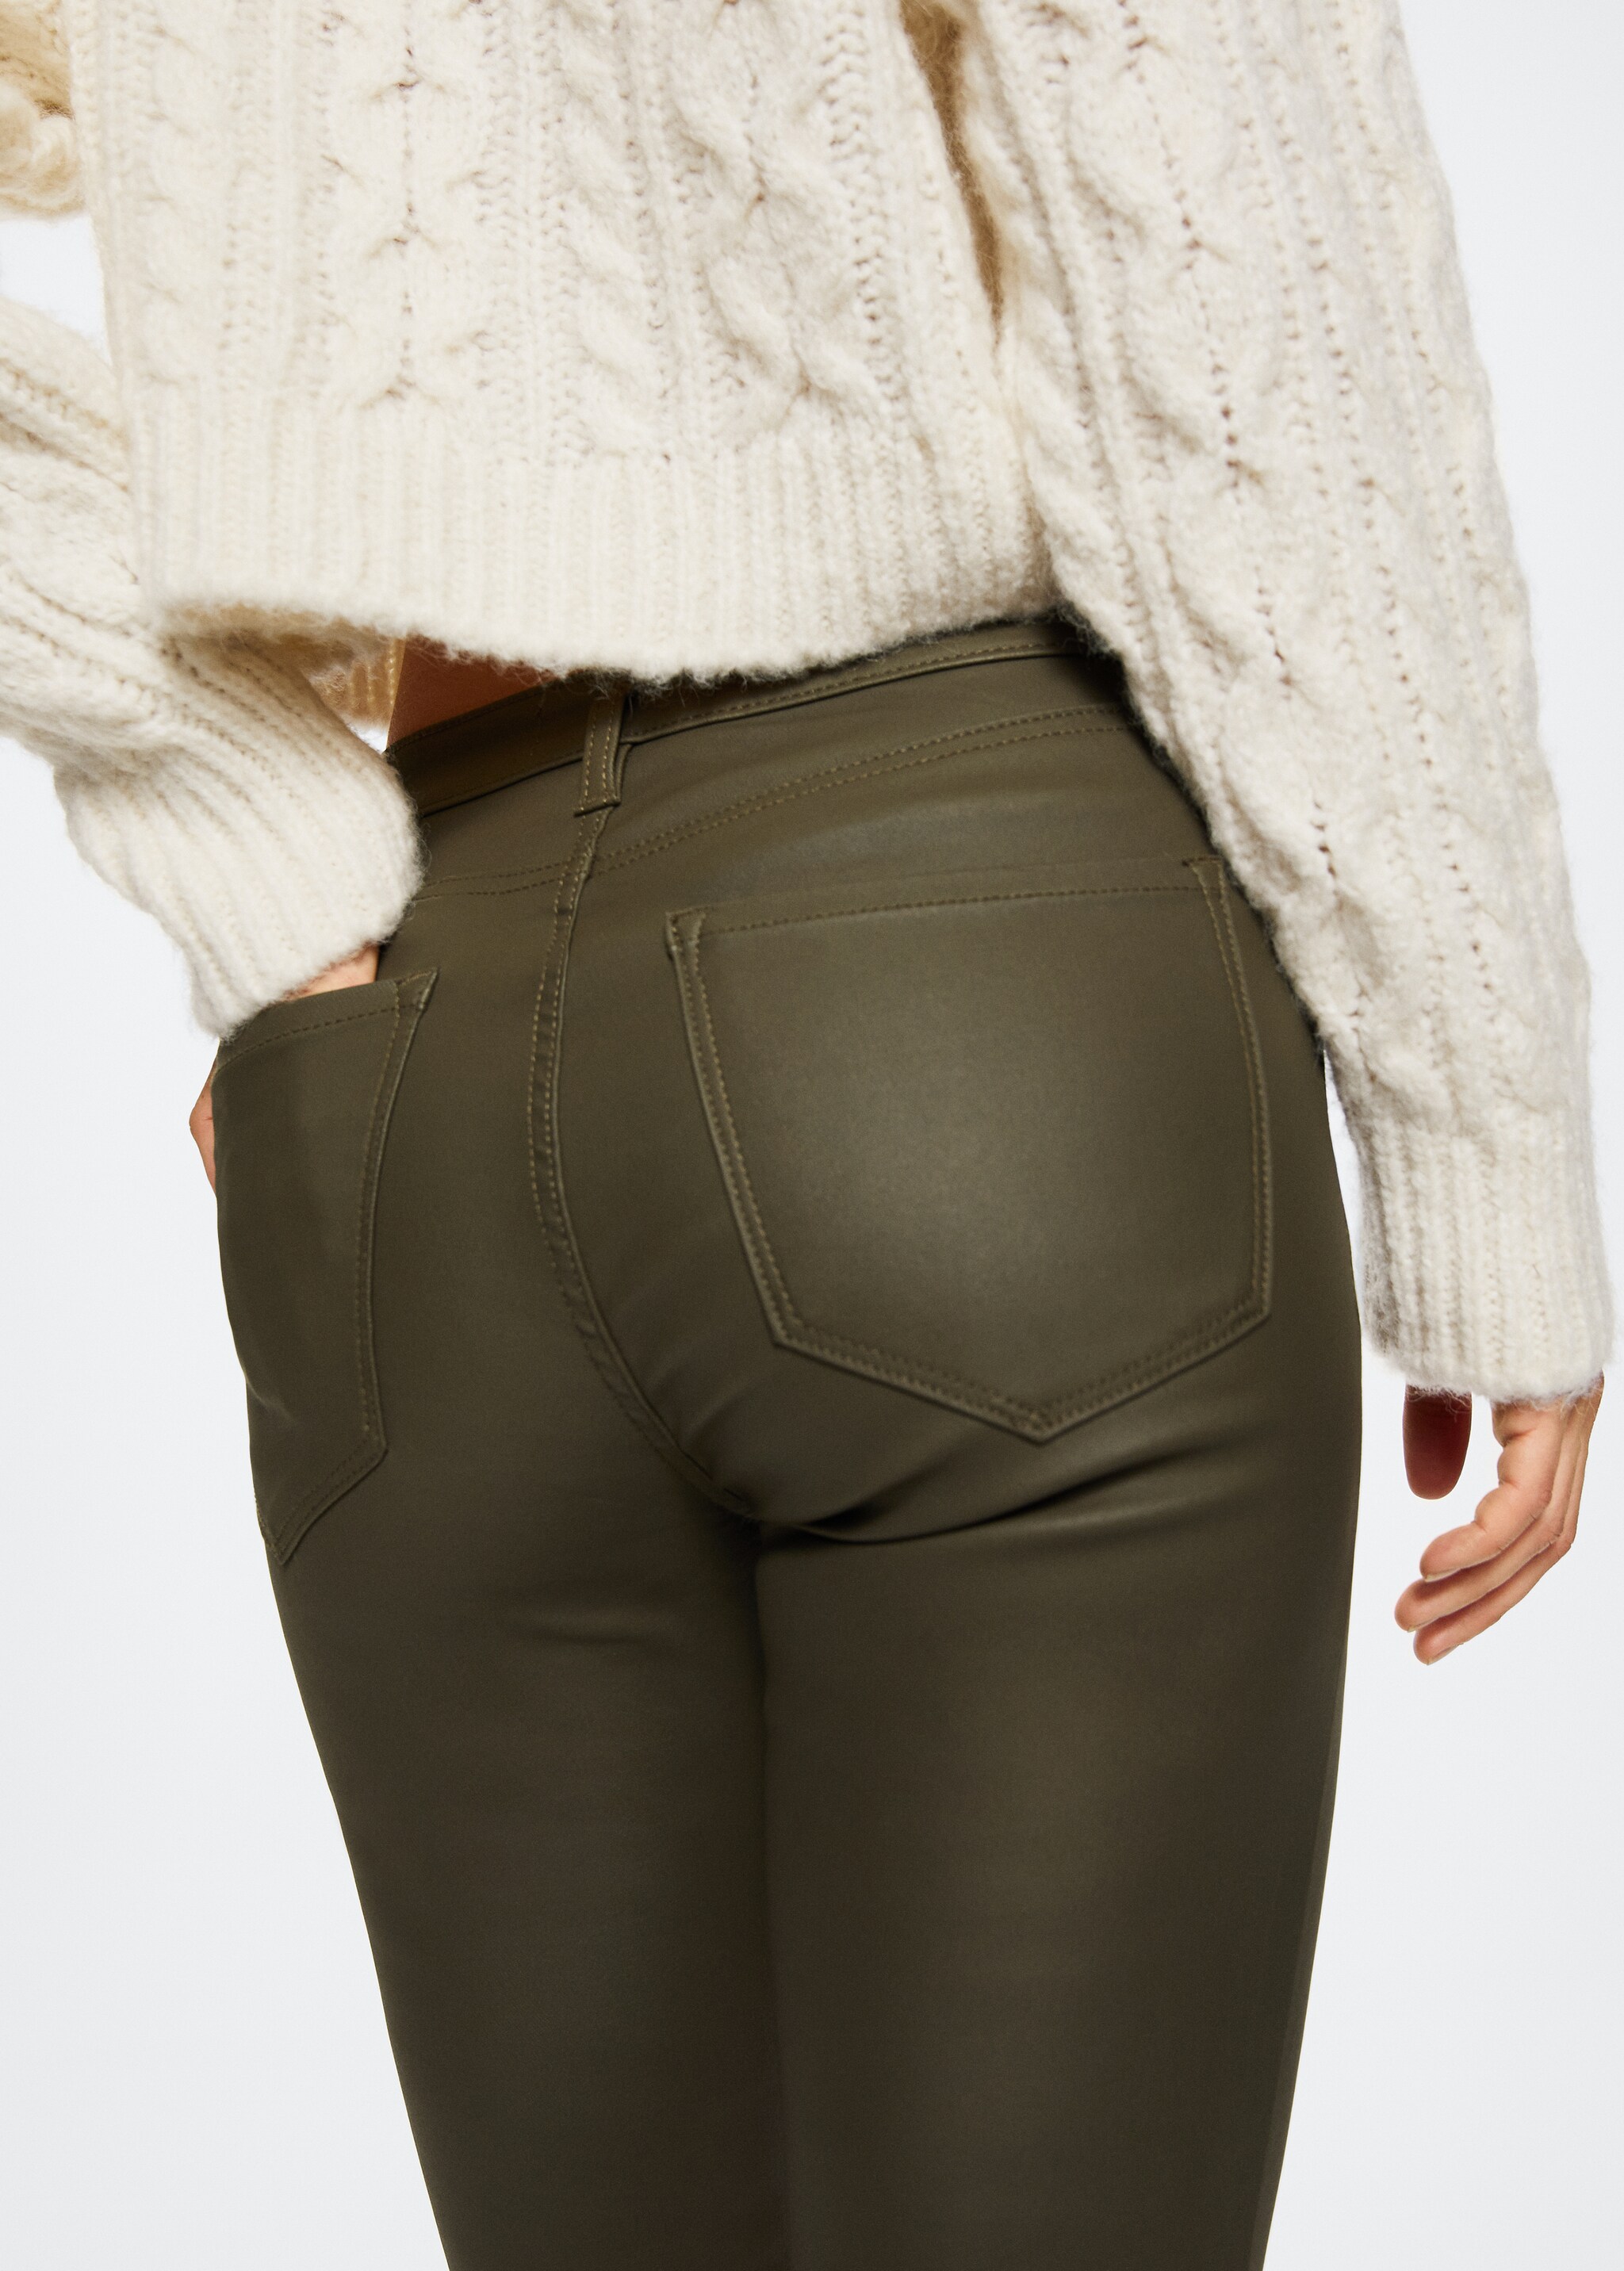 Coated Isa crop skinny jeans - Details of the article 6